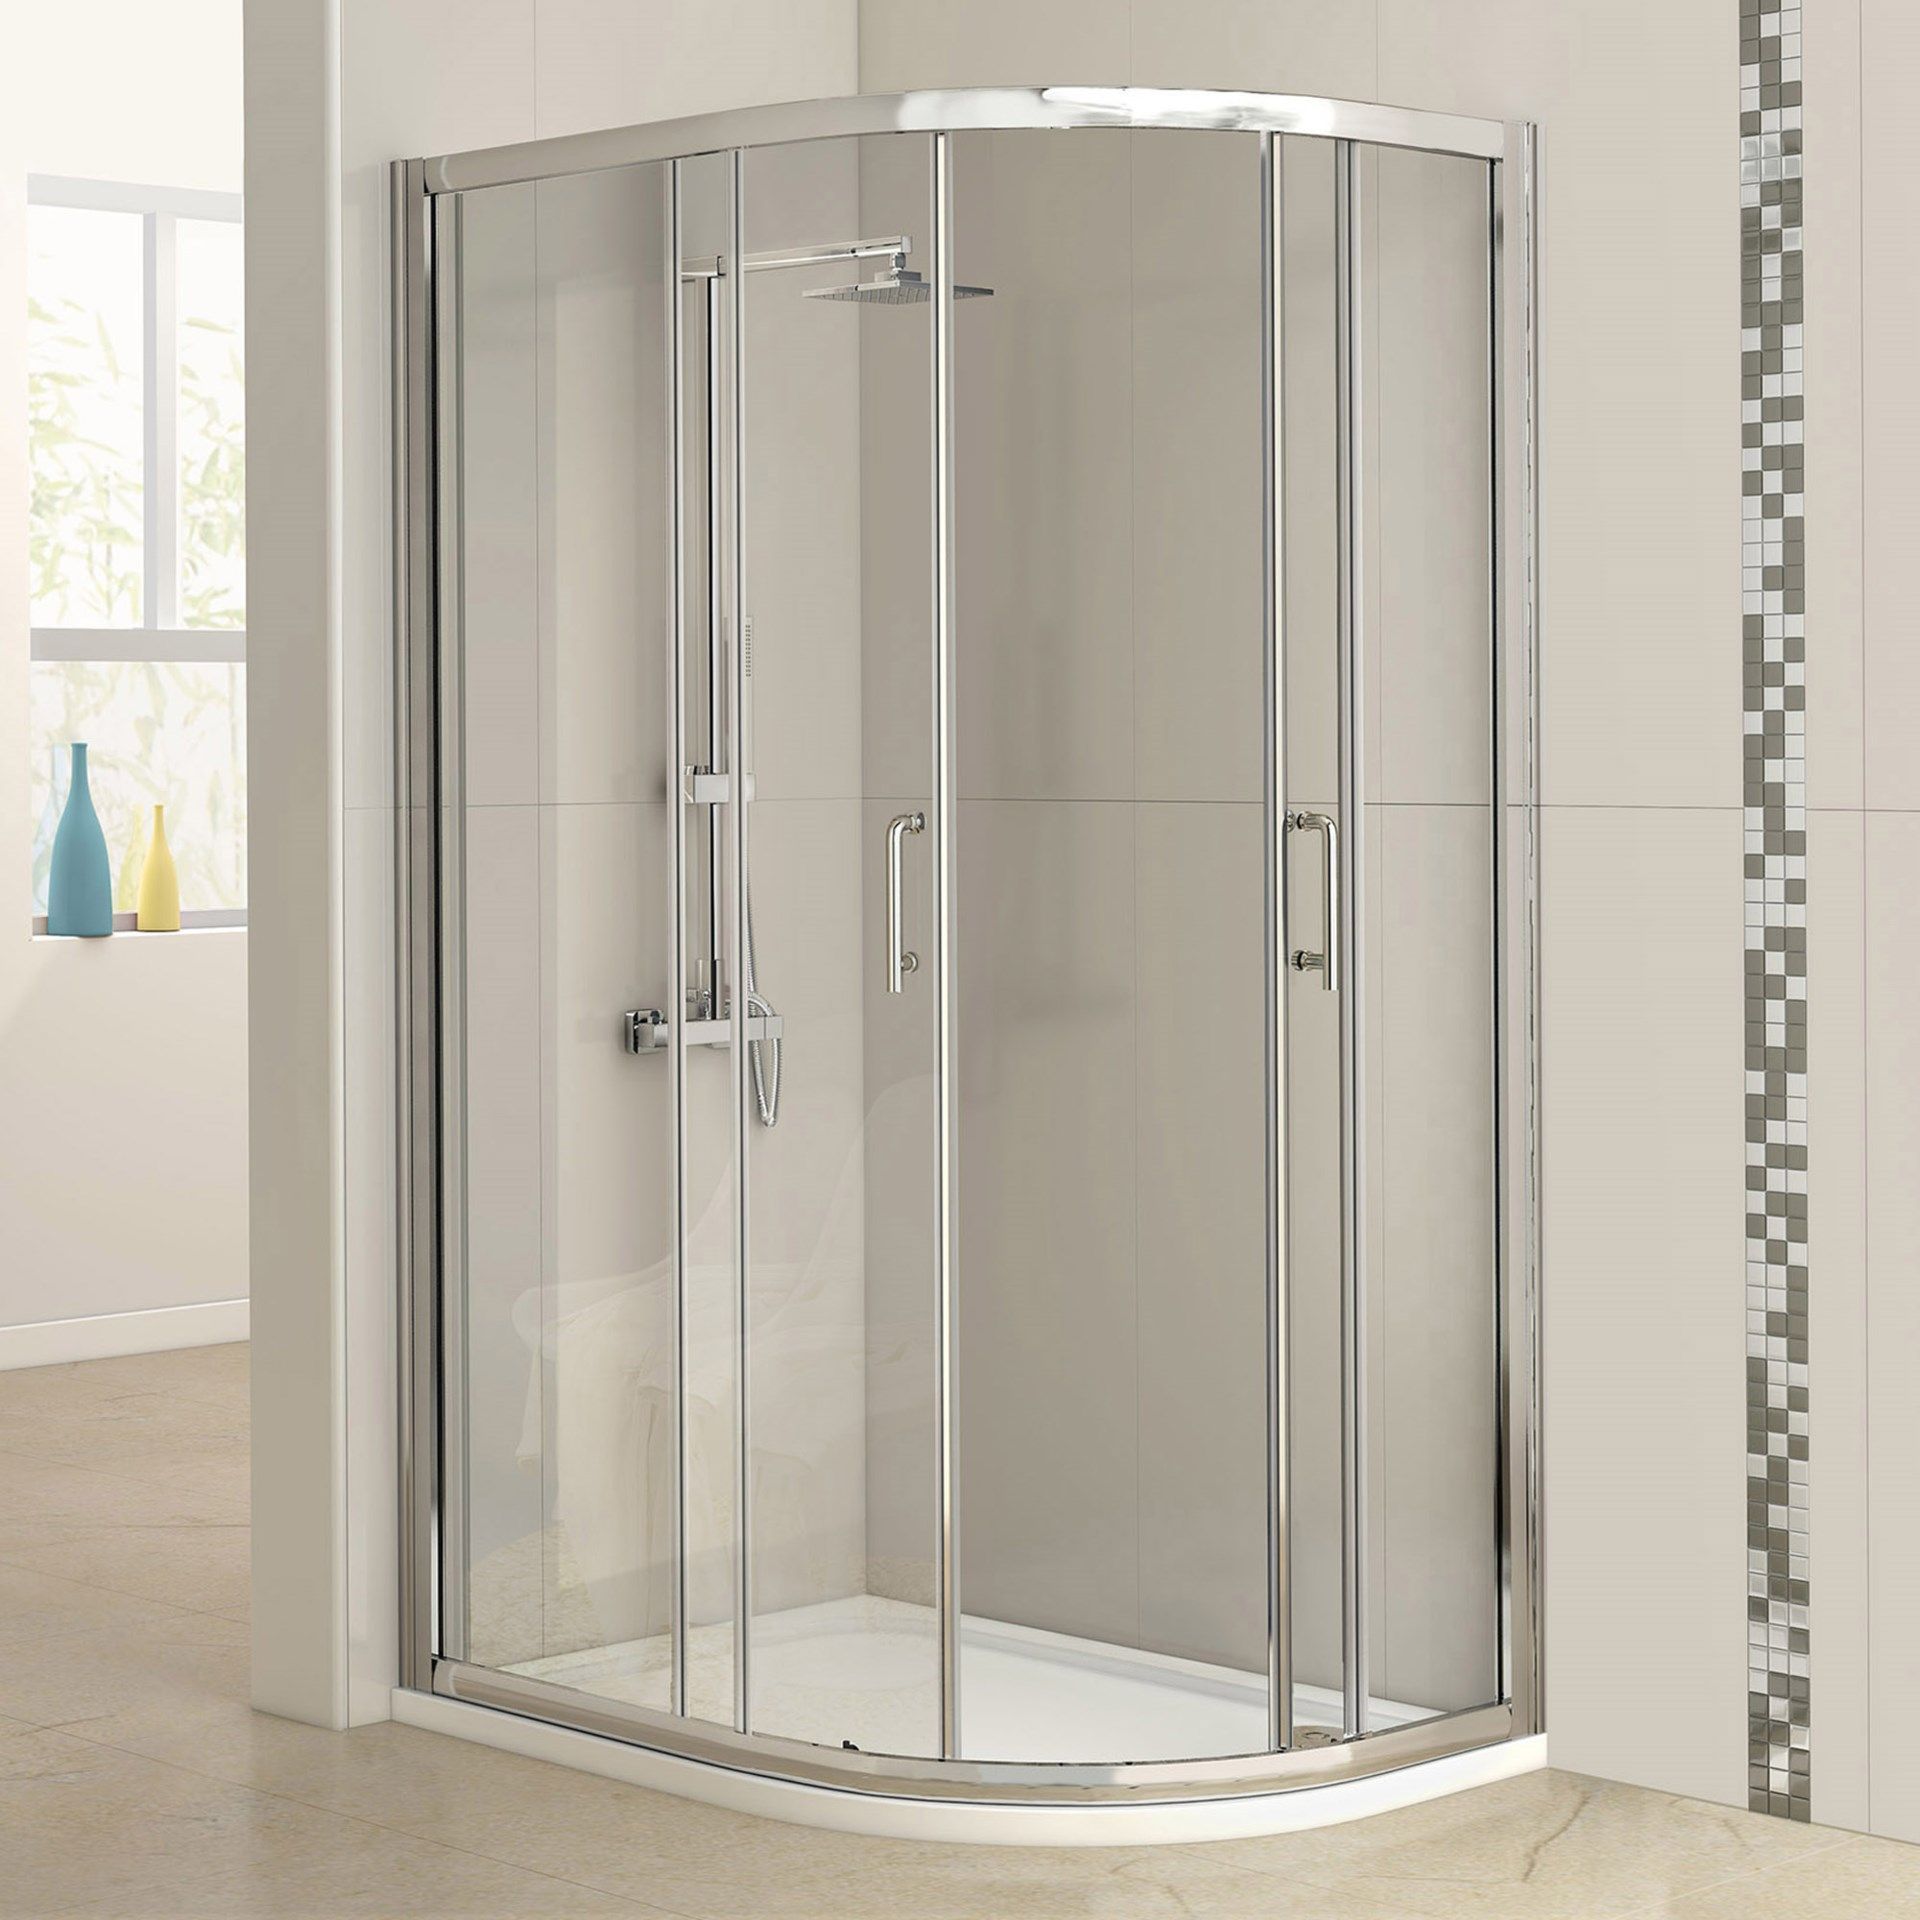 Brand New Twyfords 1200x800mm - 6mm - Offset Quadrant Shower Enclosure.RRP £599.99.Make the most of - Image 2 of 3